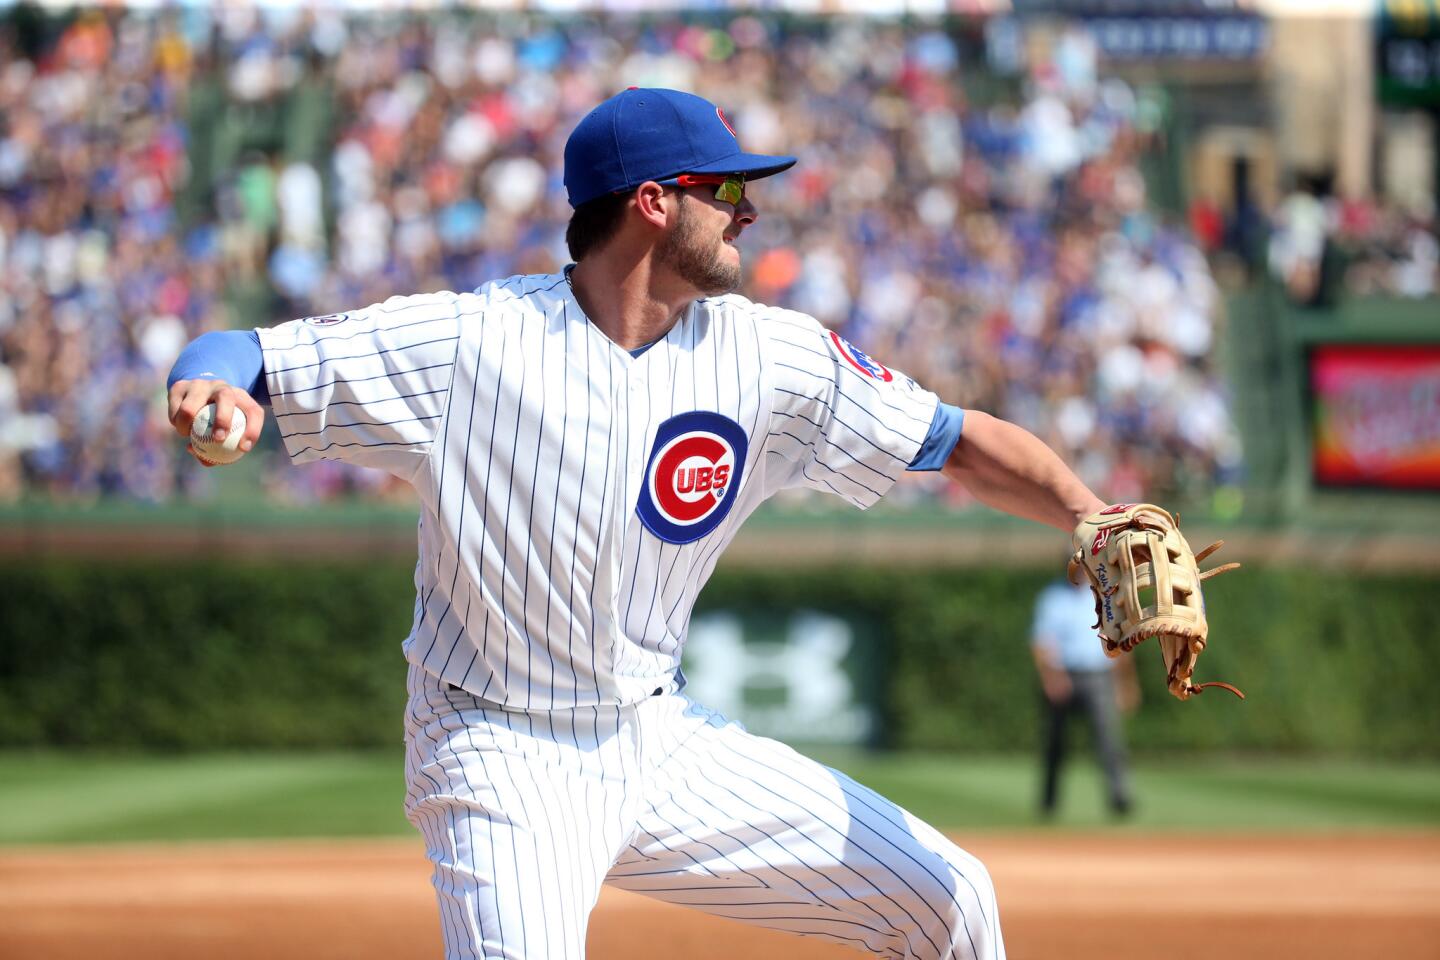 Kris Bryant won Rookie of the Year in 2015.